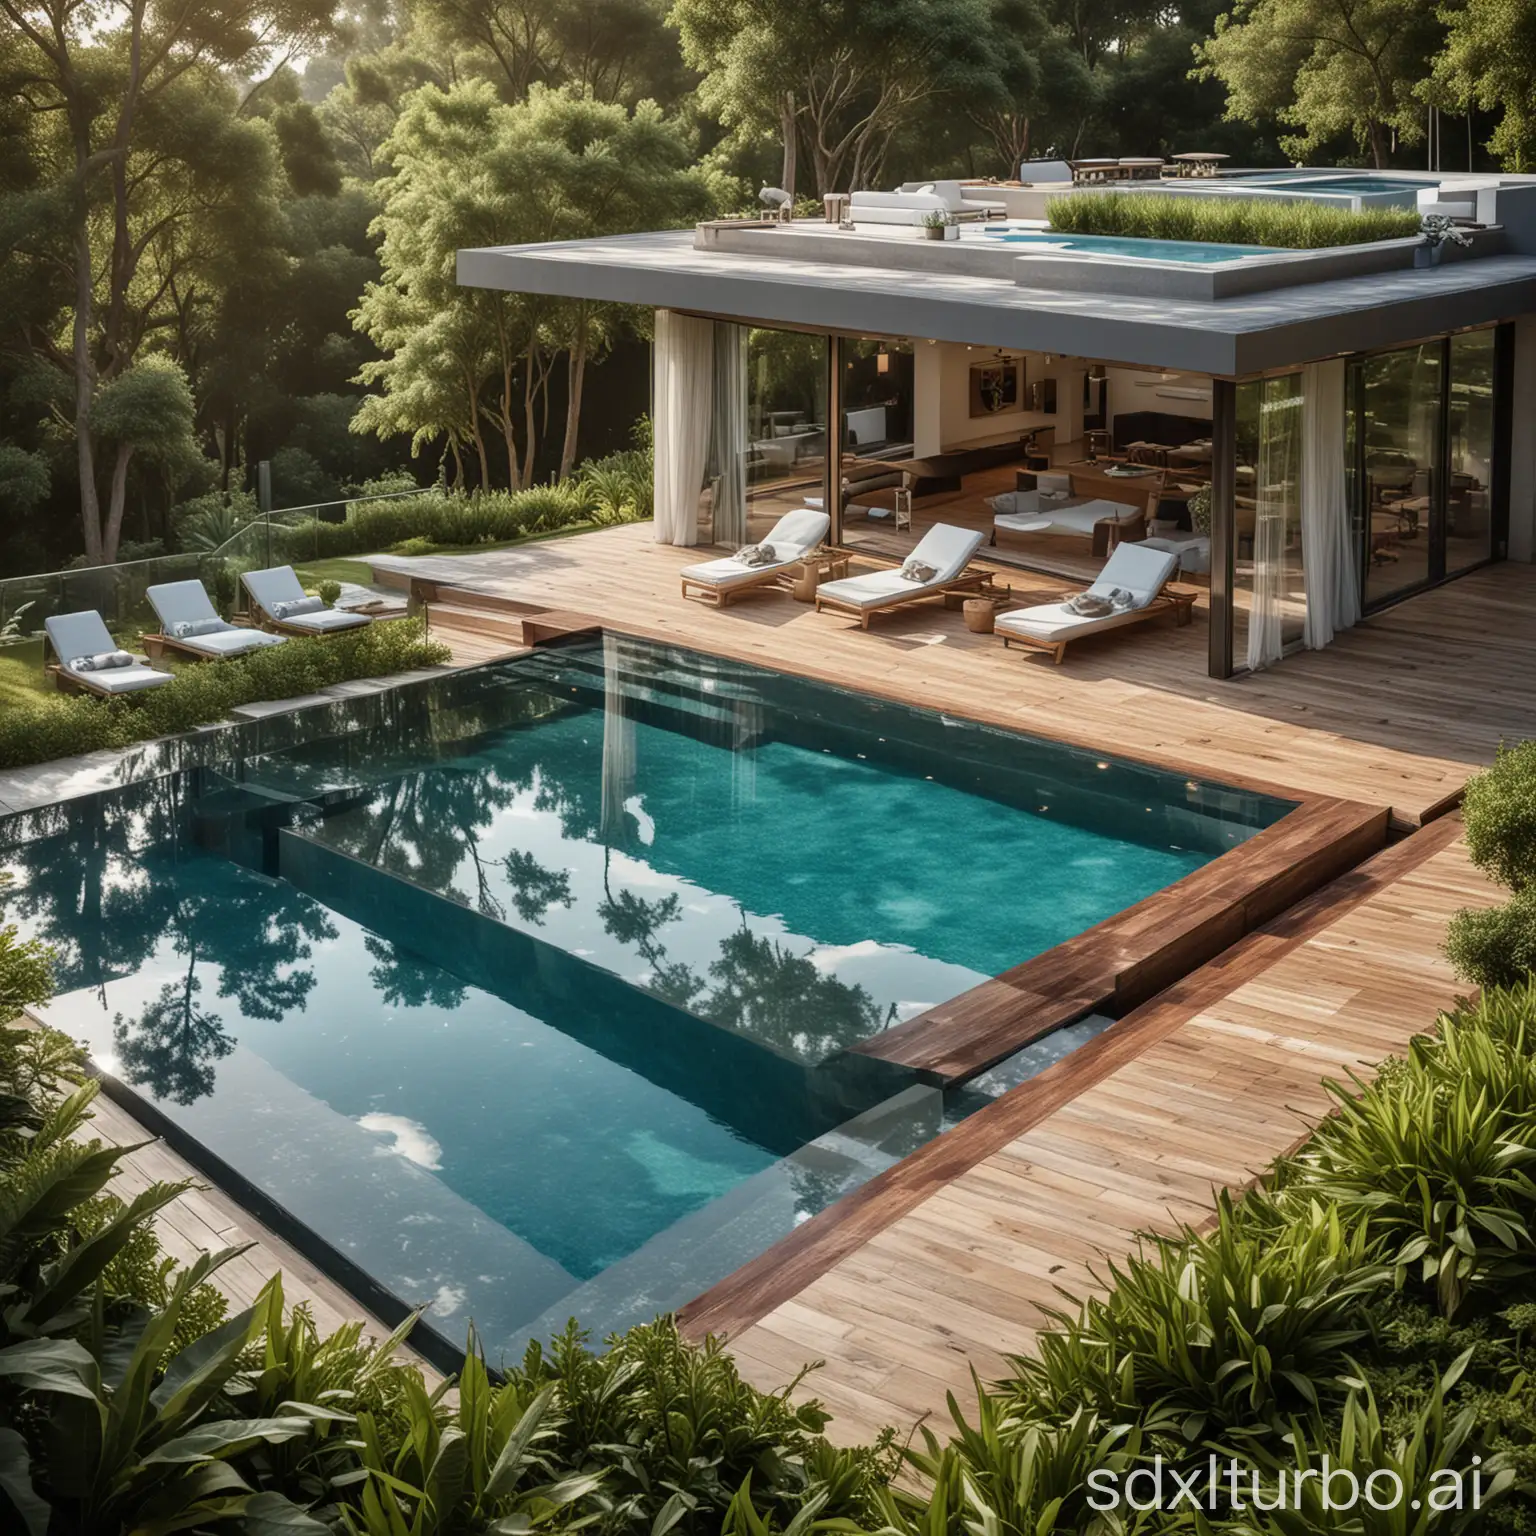 Ultra-realistic image of a luxurious villa with a stunning swimming pool. The villa features modern architecture with large glass windows that offer a panoramic view of the surrounding landscape. The pool, with crystal-clear blue water, is surrounded by a sleek wooden deck and comfortable lounge chairs. Lush greenery and meticulously landscaped gardens provide a serene and private atmosphere. The villa's exterior is adorned with elegant lighting, and the interior glimpses show sophisticated decor and high-end furnishings. The overall scene exudes opulence and tranquility, making it an ideal retreat.